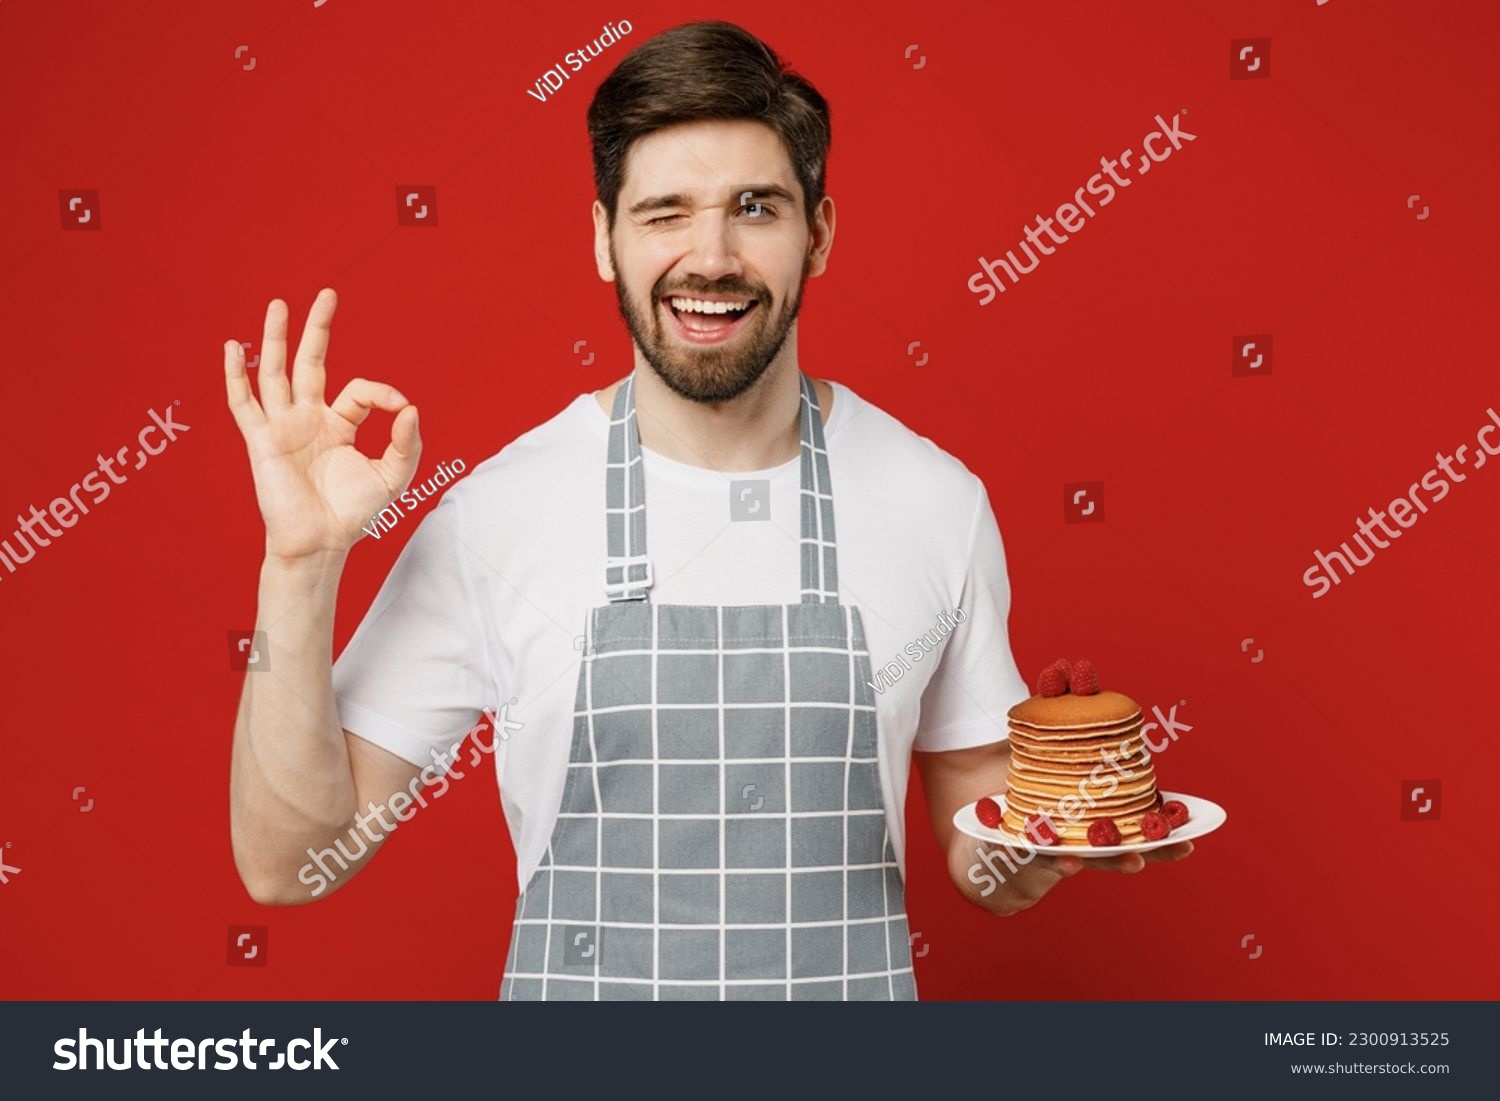 Young smiling happy fun male housewife housekeeper chef cook baker man wearing grey apron hold in hand plate with pancakes show ok gesture isolated on plain red background studio. Cooking food concept #2300913525